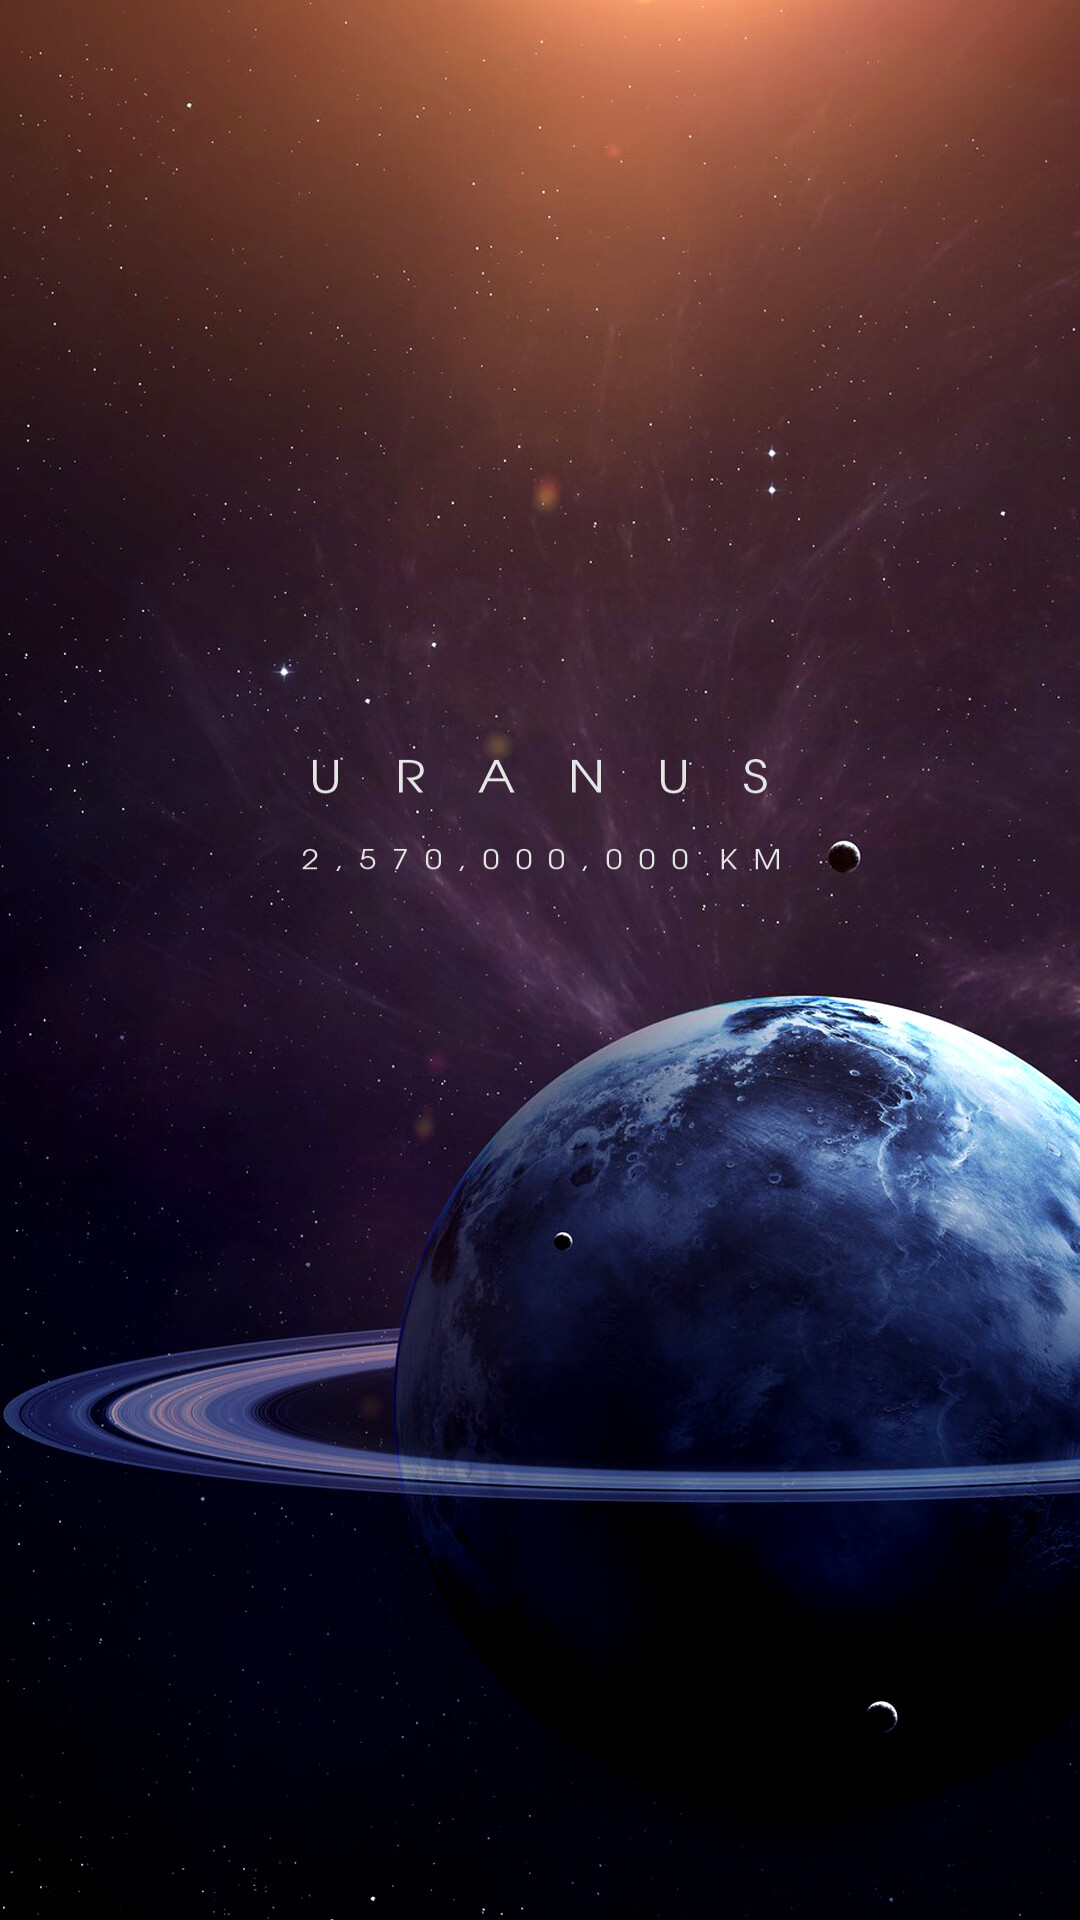 Uranus: Solar System, Cosmos, The planet's equatorial circumference is 159,354 km. 1080x1920 Full HD Wallpaper.